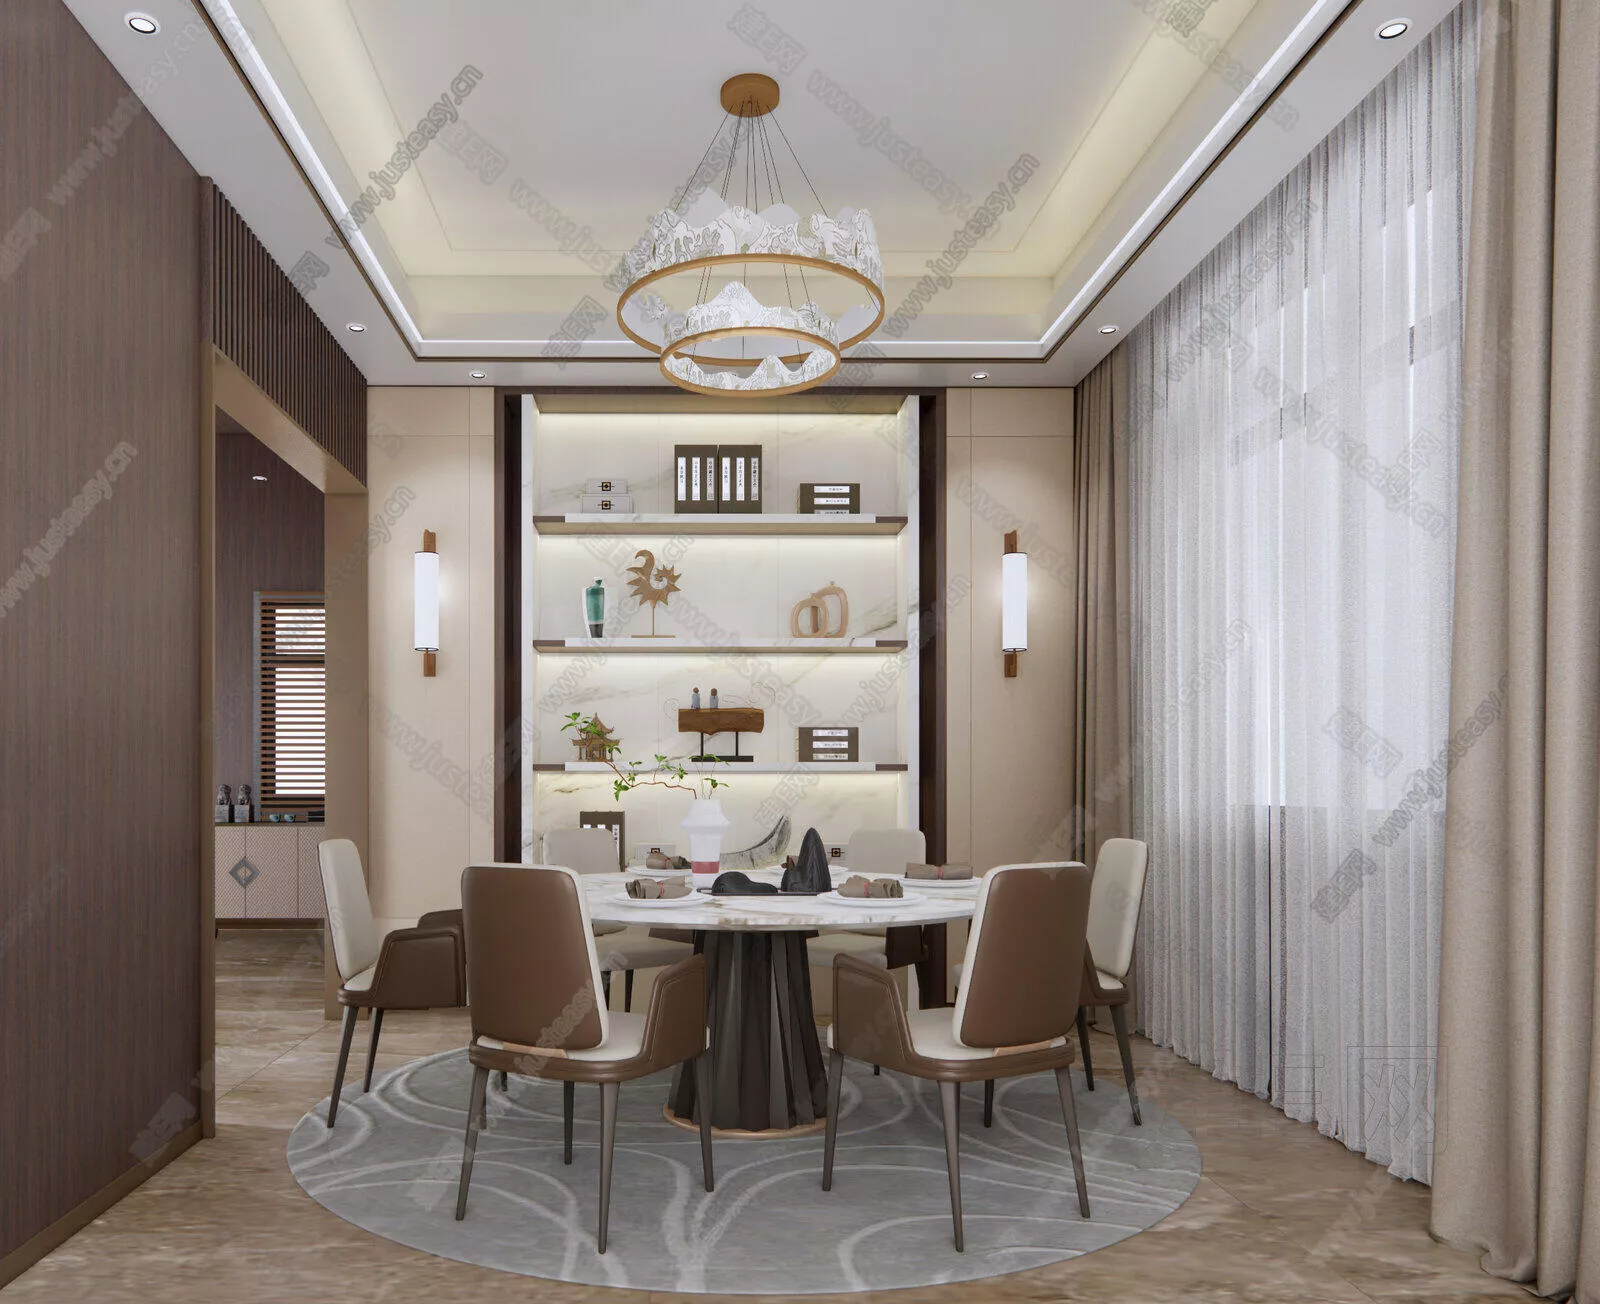 CHINESE DINING ROOM - SKETCHUP 3D SCENE - ENSCAPE - 116671592